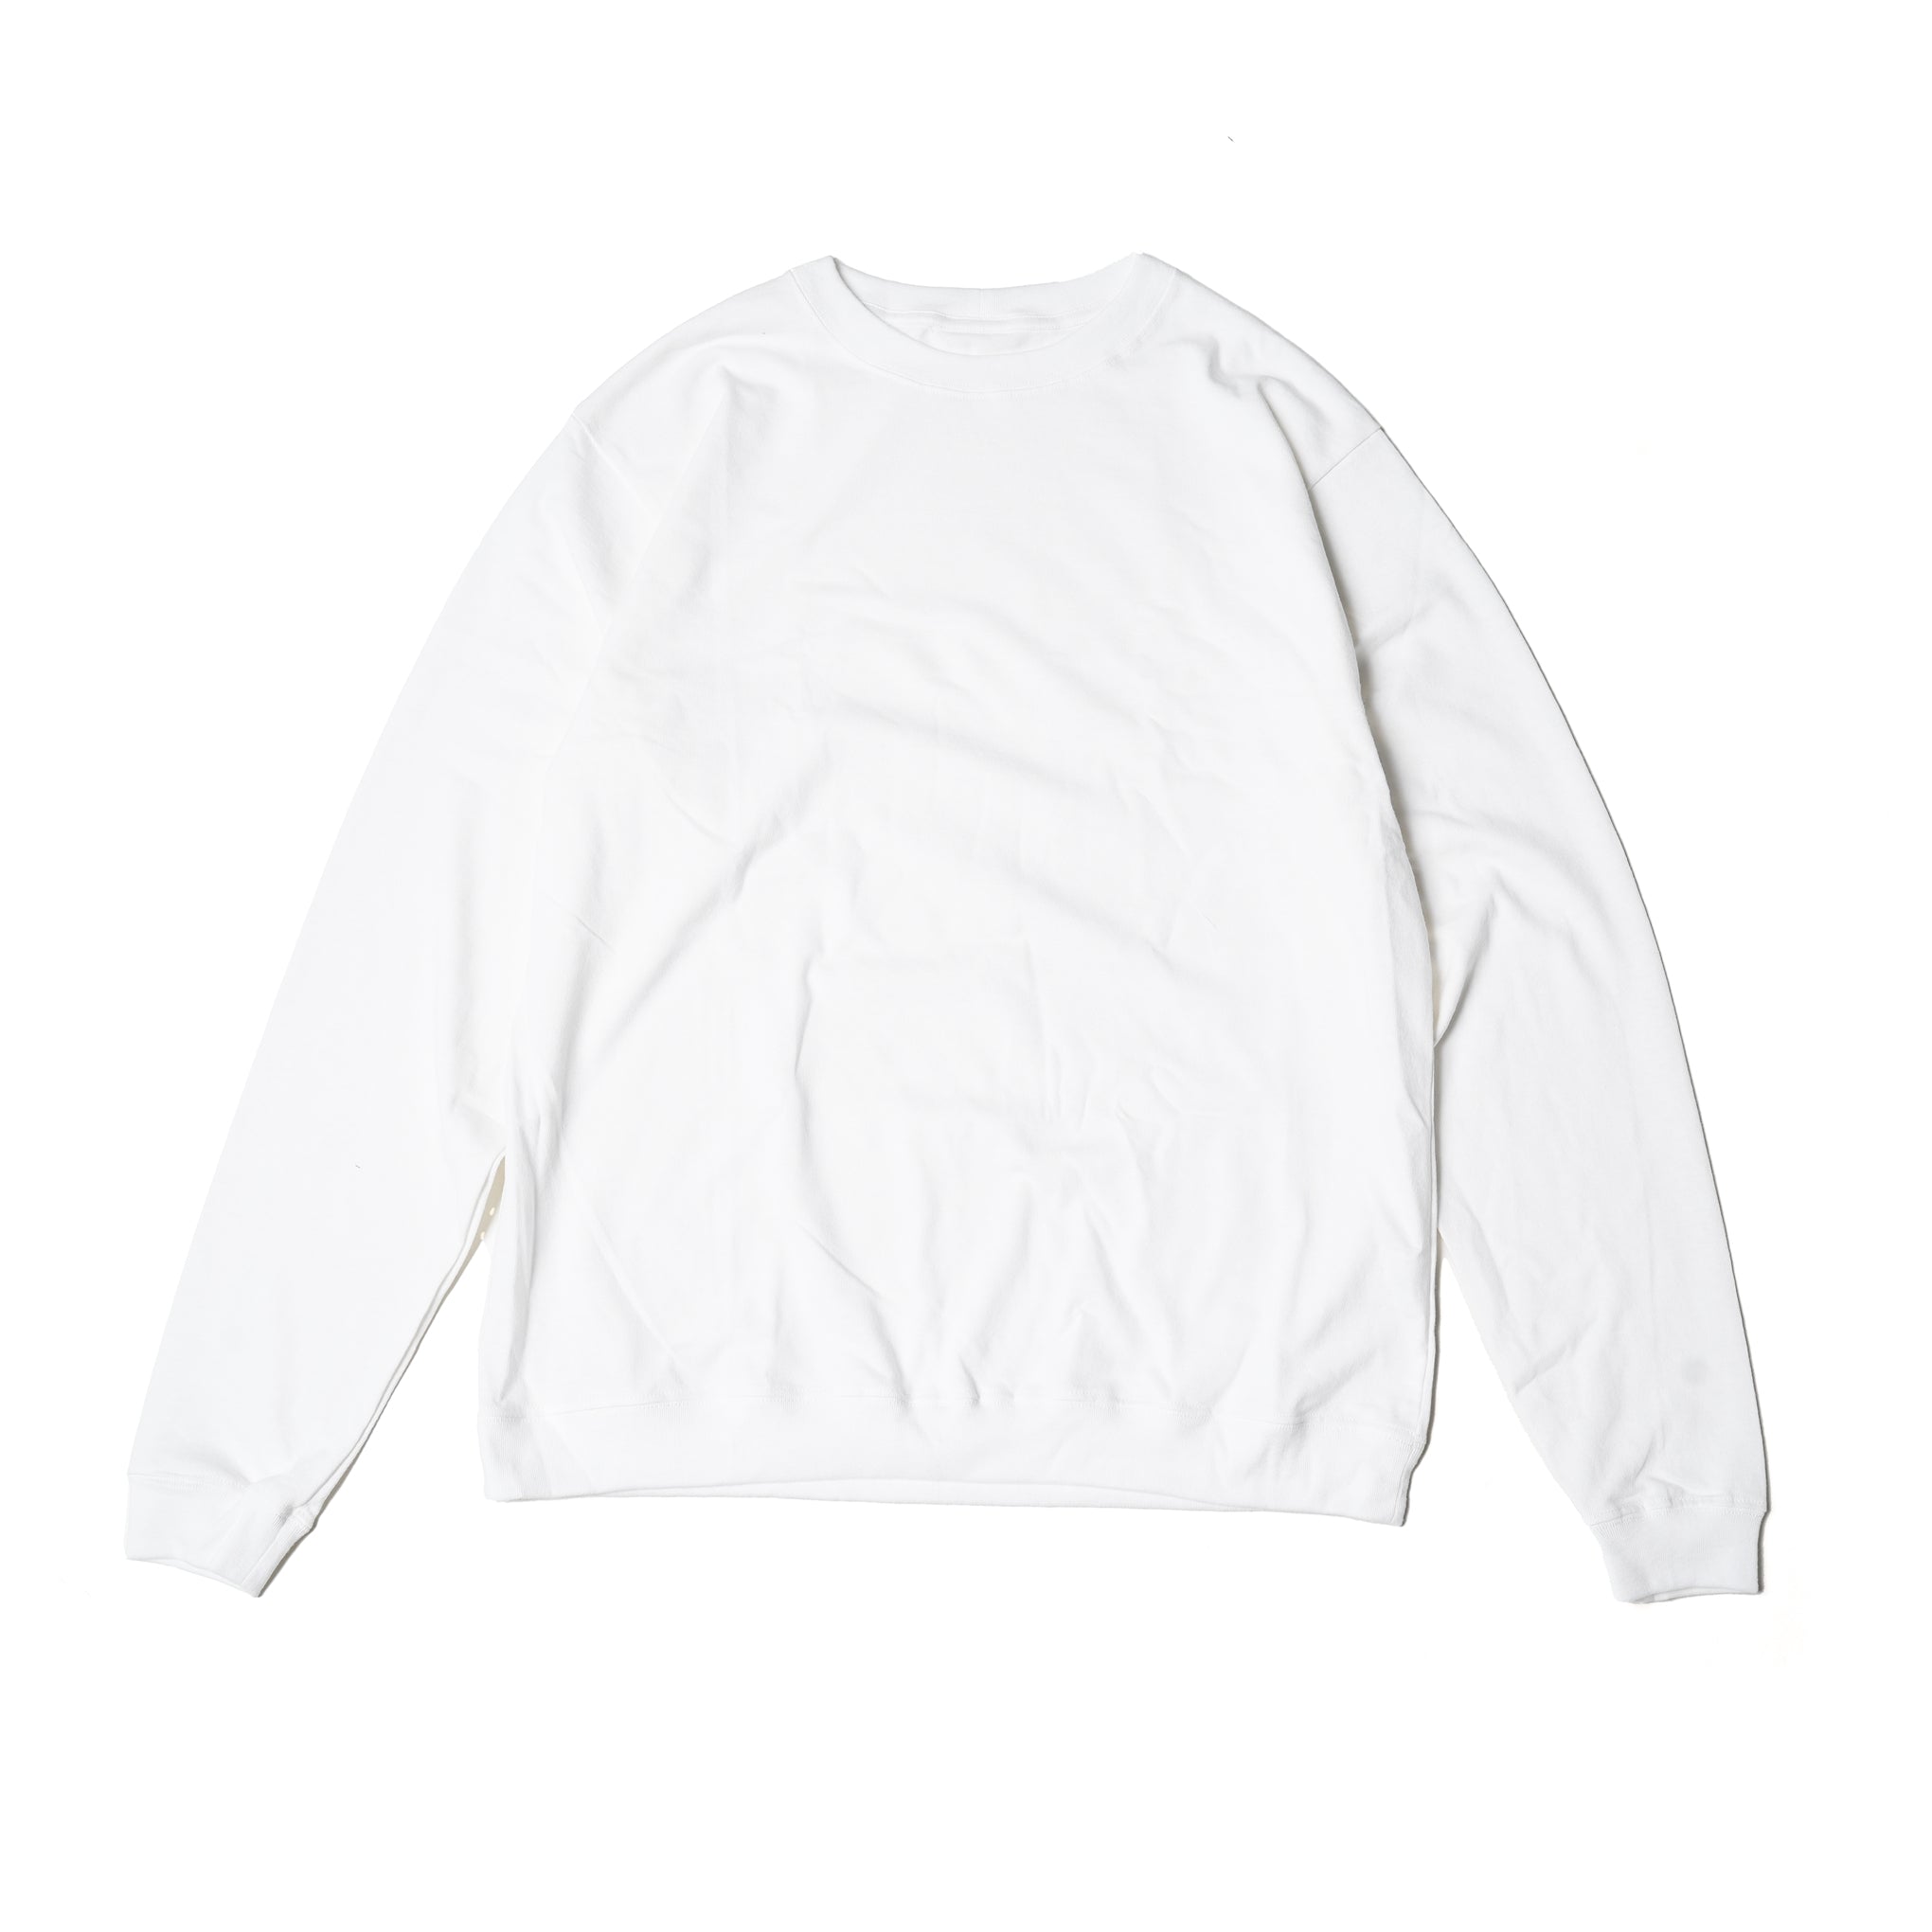 No:FIT-02 | Name:WIDE CREW NECK L/S T-SHIRTS | Color:White/Black【FIT_フィット】